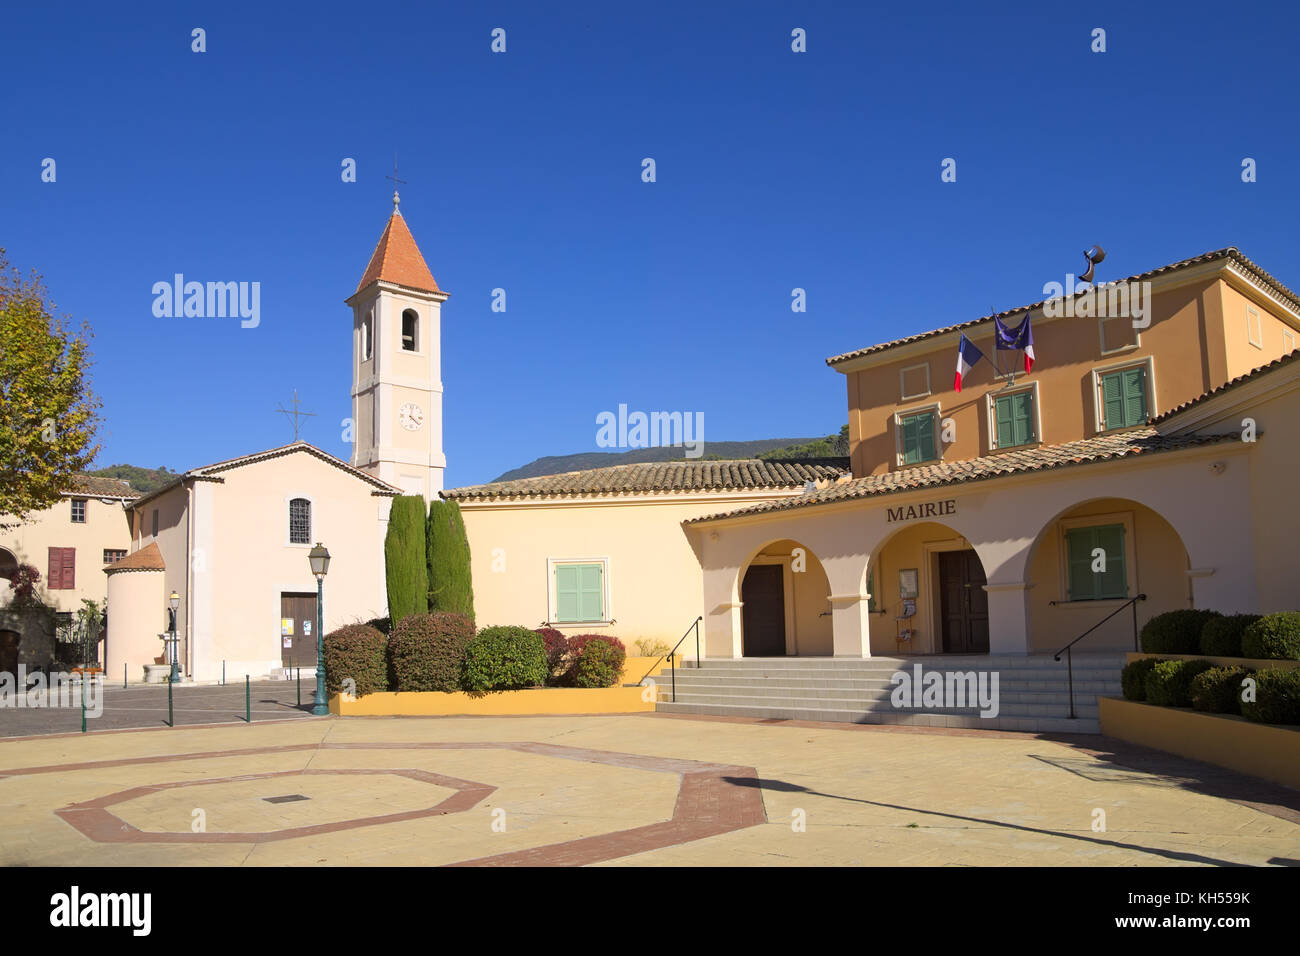 Saint-Blaise is a village in the Alpes-Maritimes département in southeastern France on the Route of Perched Villages. Stock Photo